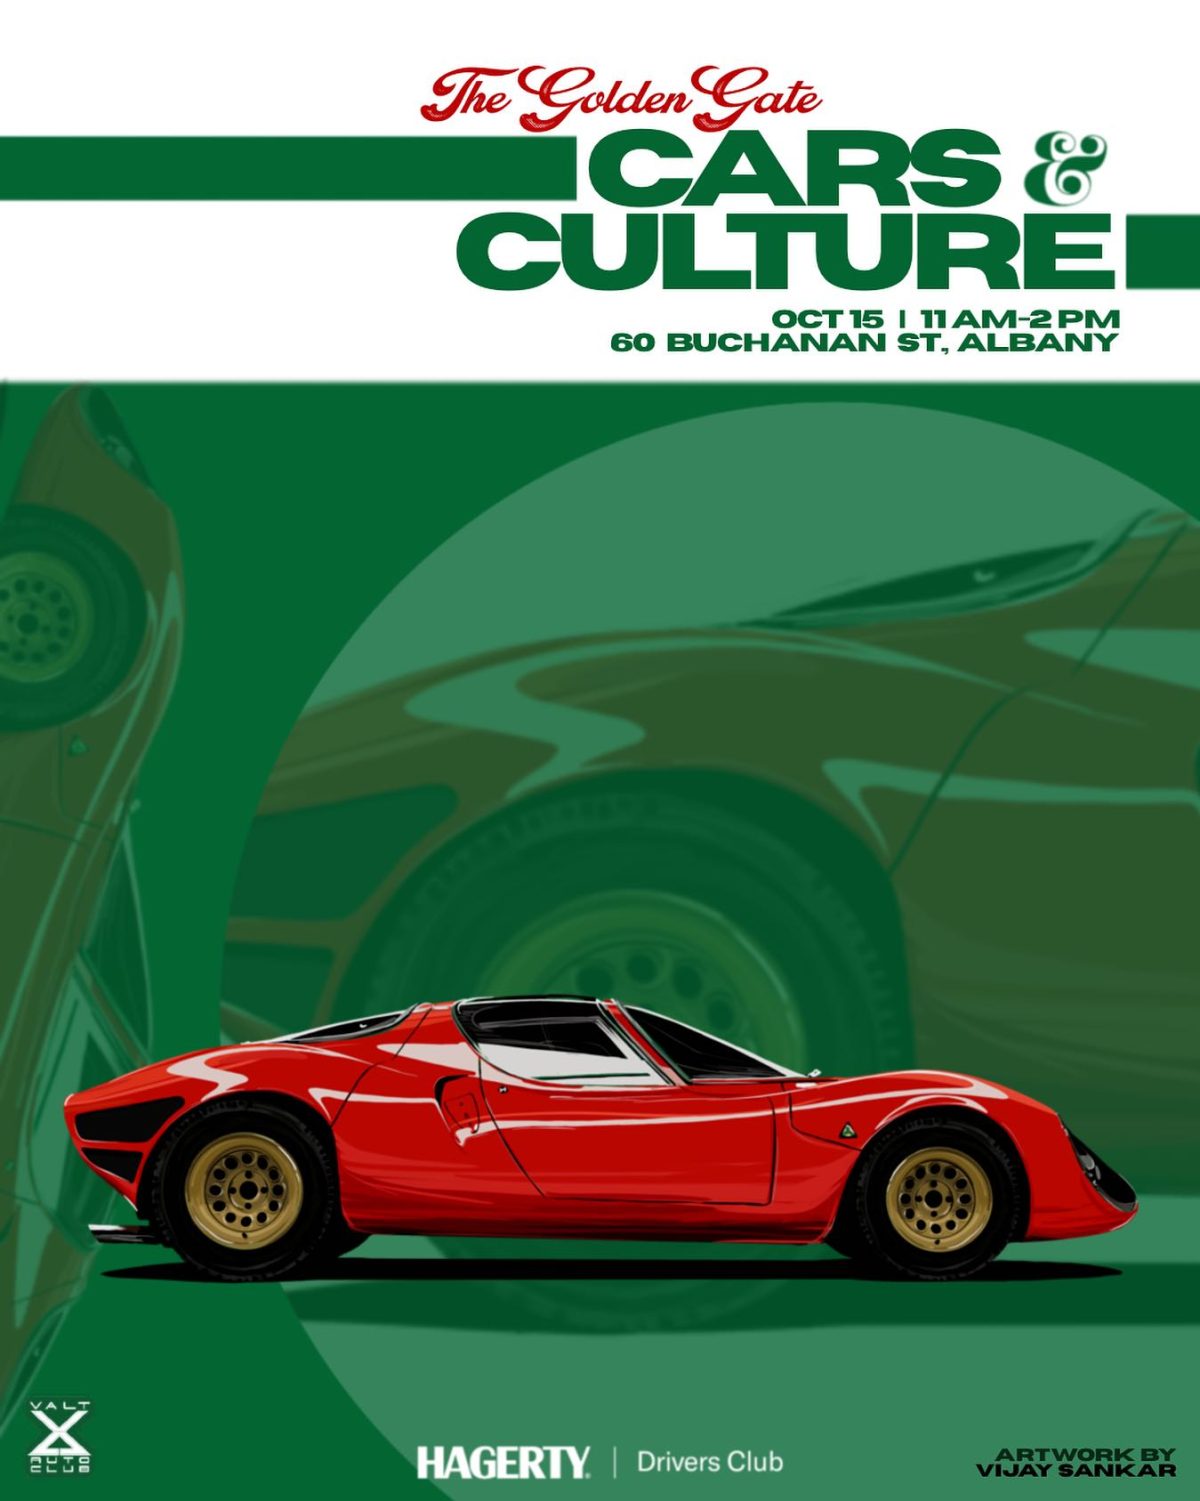 Golden Gate Cars and Culture